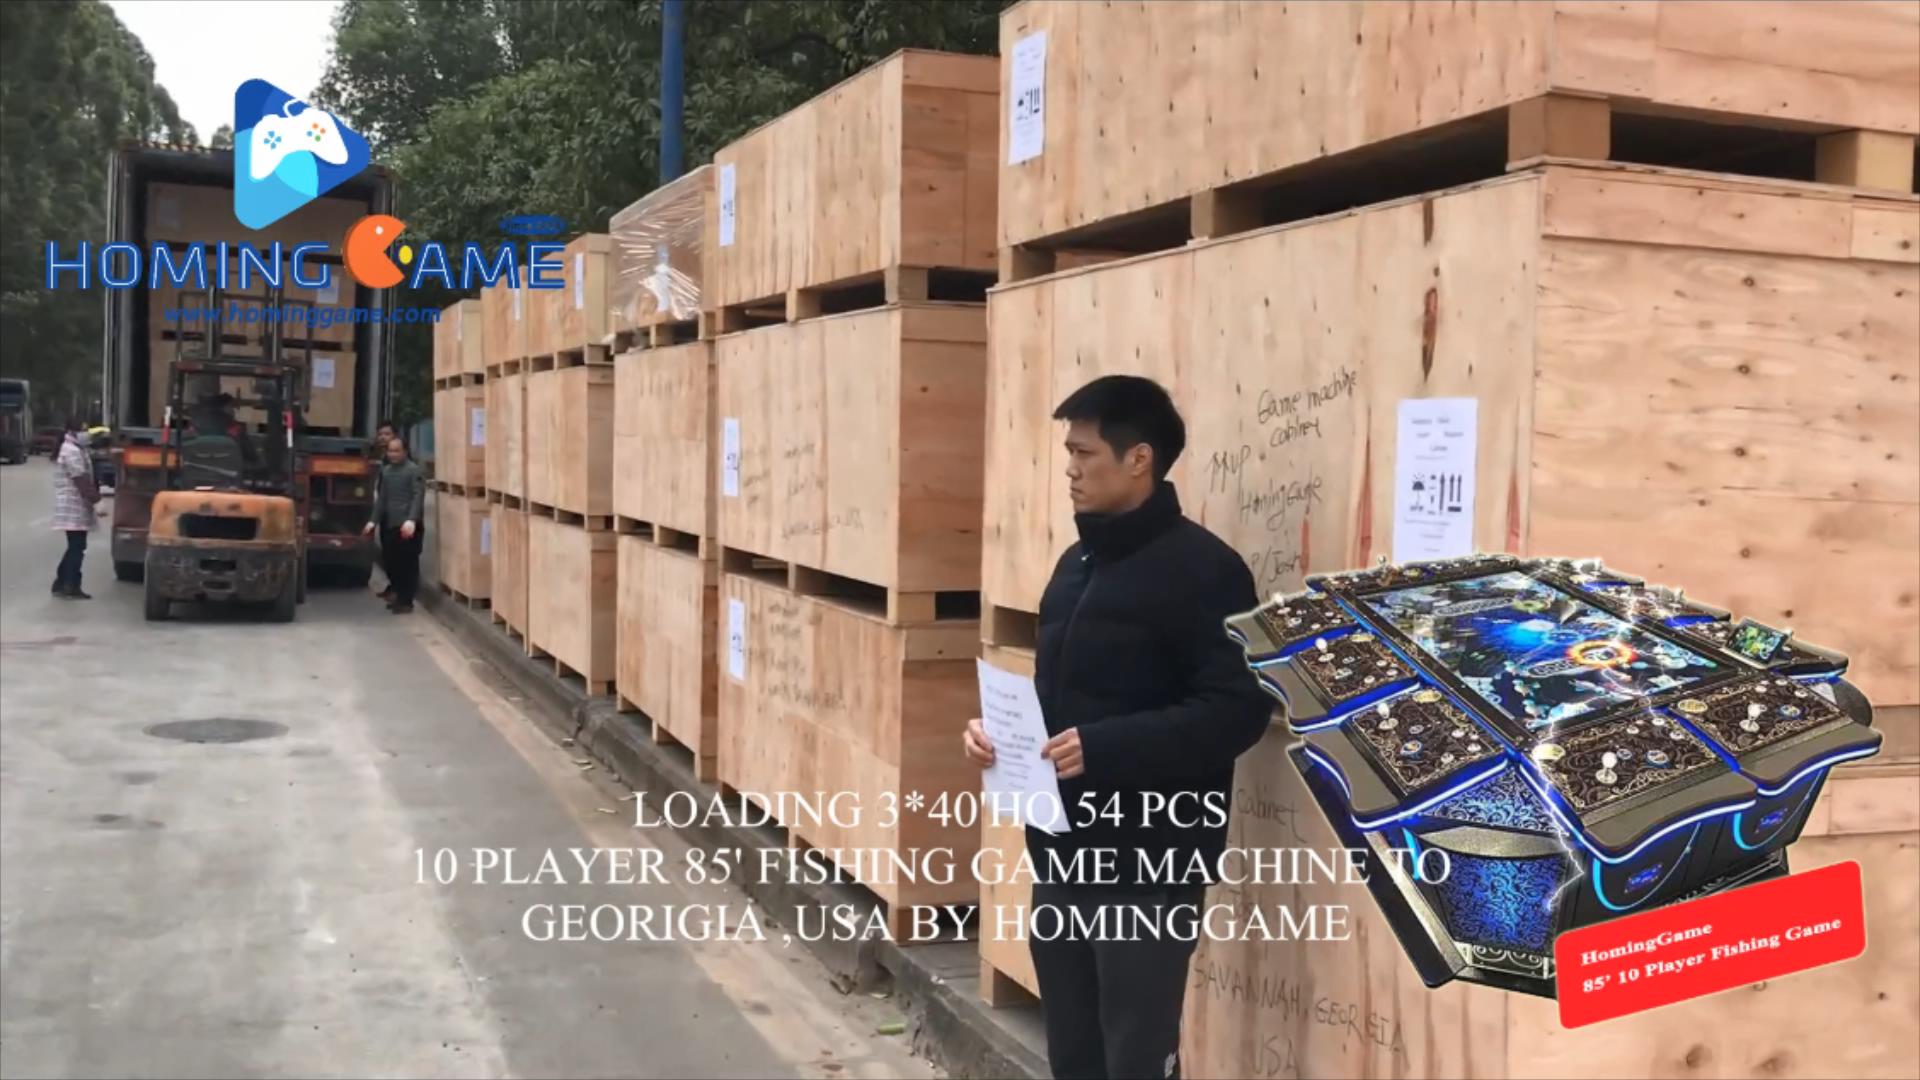 Fishing Game-Date 9th Jan 2021 Deliver 3 40'HQ Container total 54 pcs HomingGame Hot Sale 85' 10 player Fishing Table game machine to Georigia,USA(Order call whatsapp:+8618688409495 or Email:sales@...,